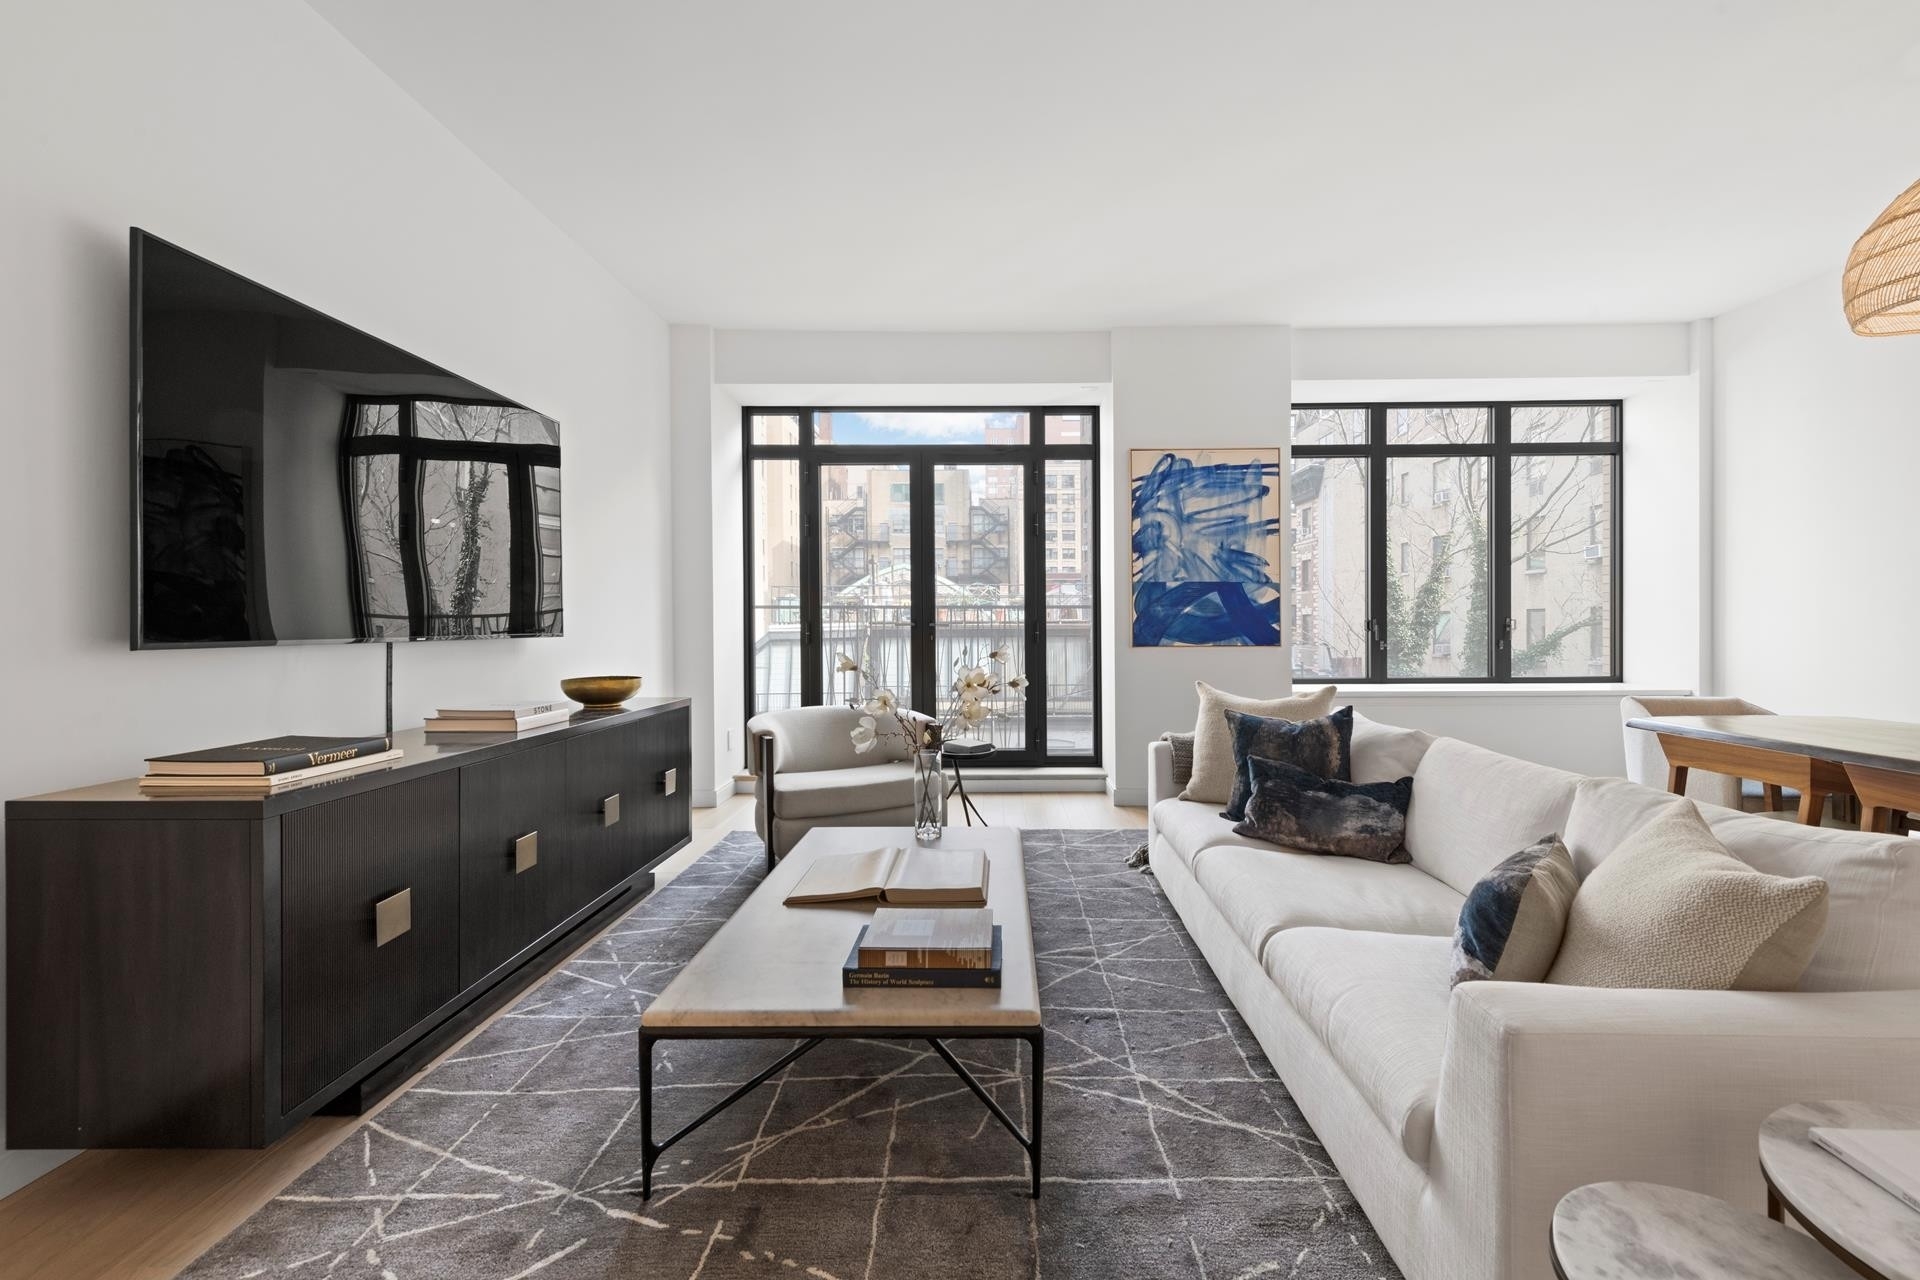 Co-op / Condo for Sale at The Chamberlain, 269 W 87TH ST , 7B Upper West Side, New York, NY 10024